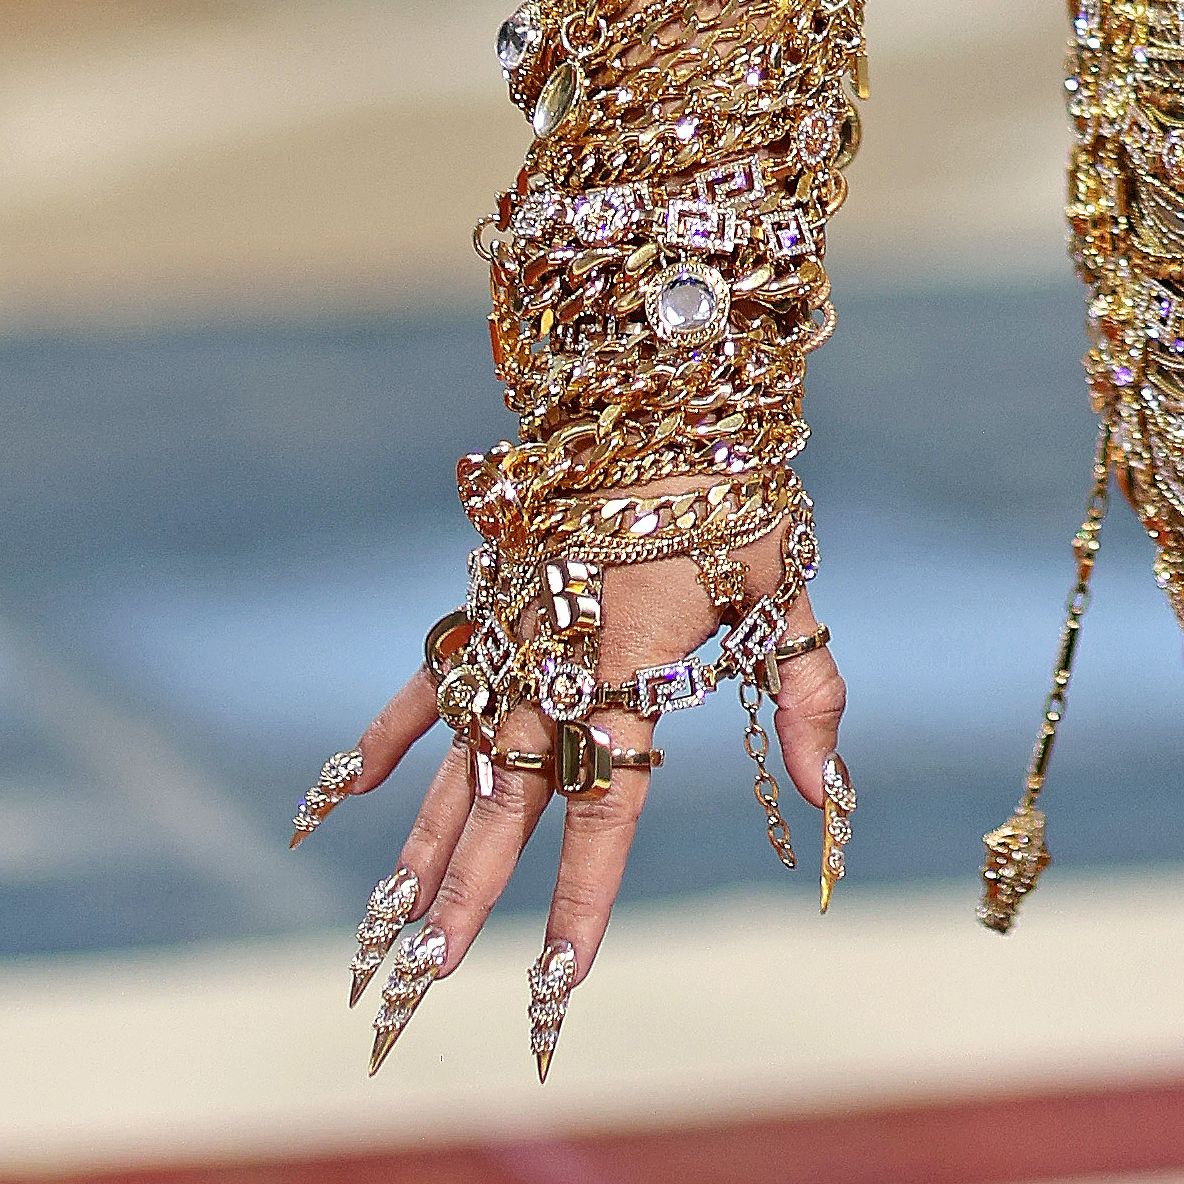 Nails Were On Point At This Year's Met Gala